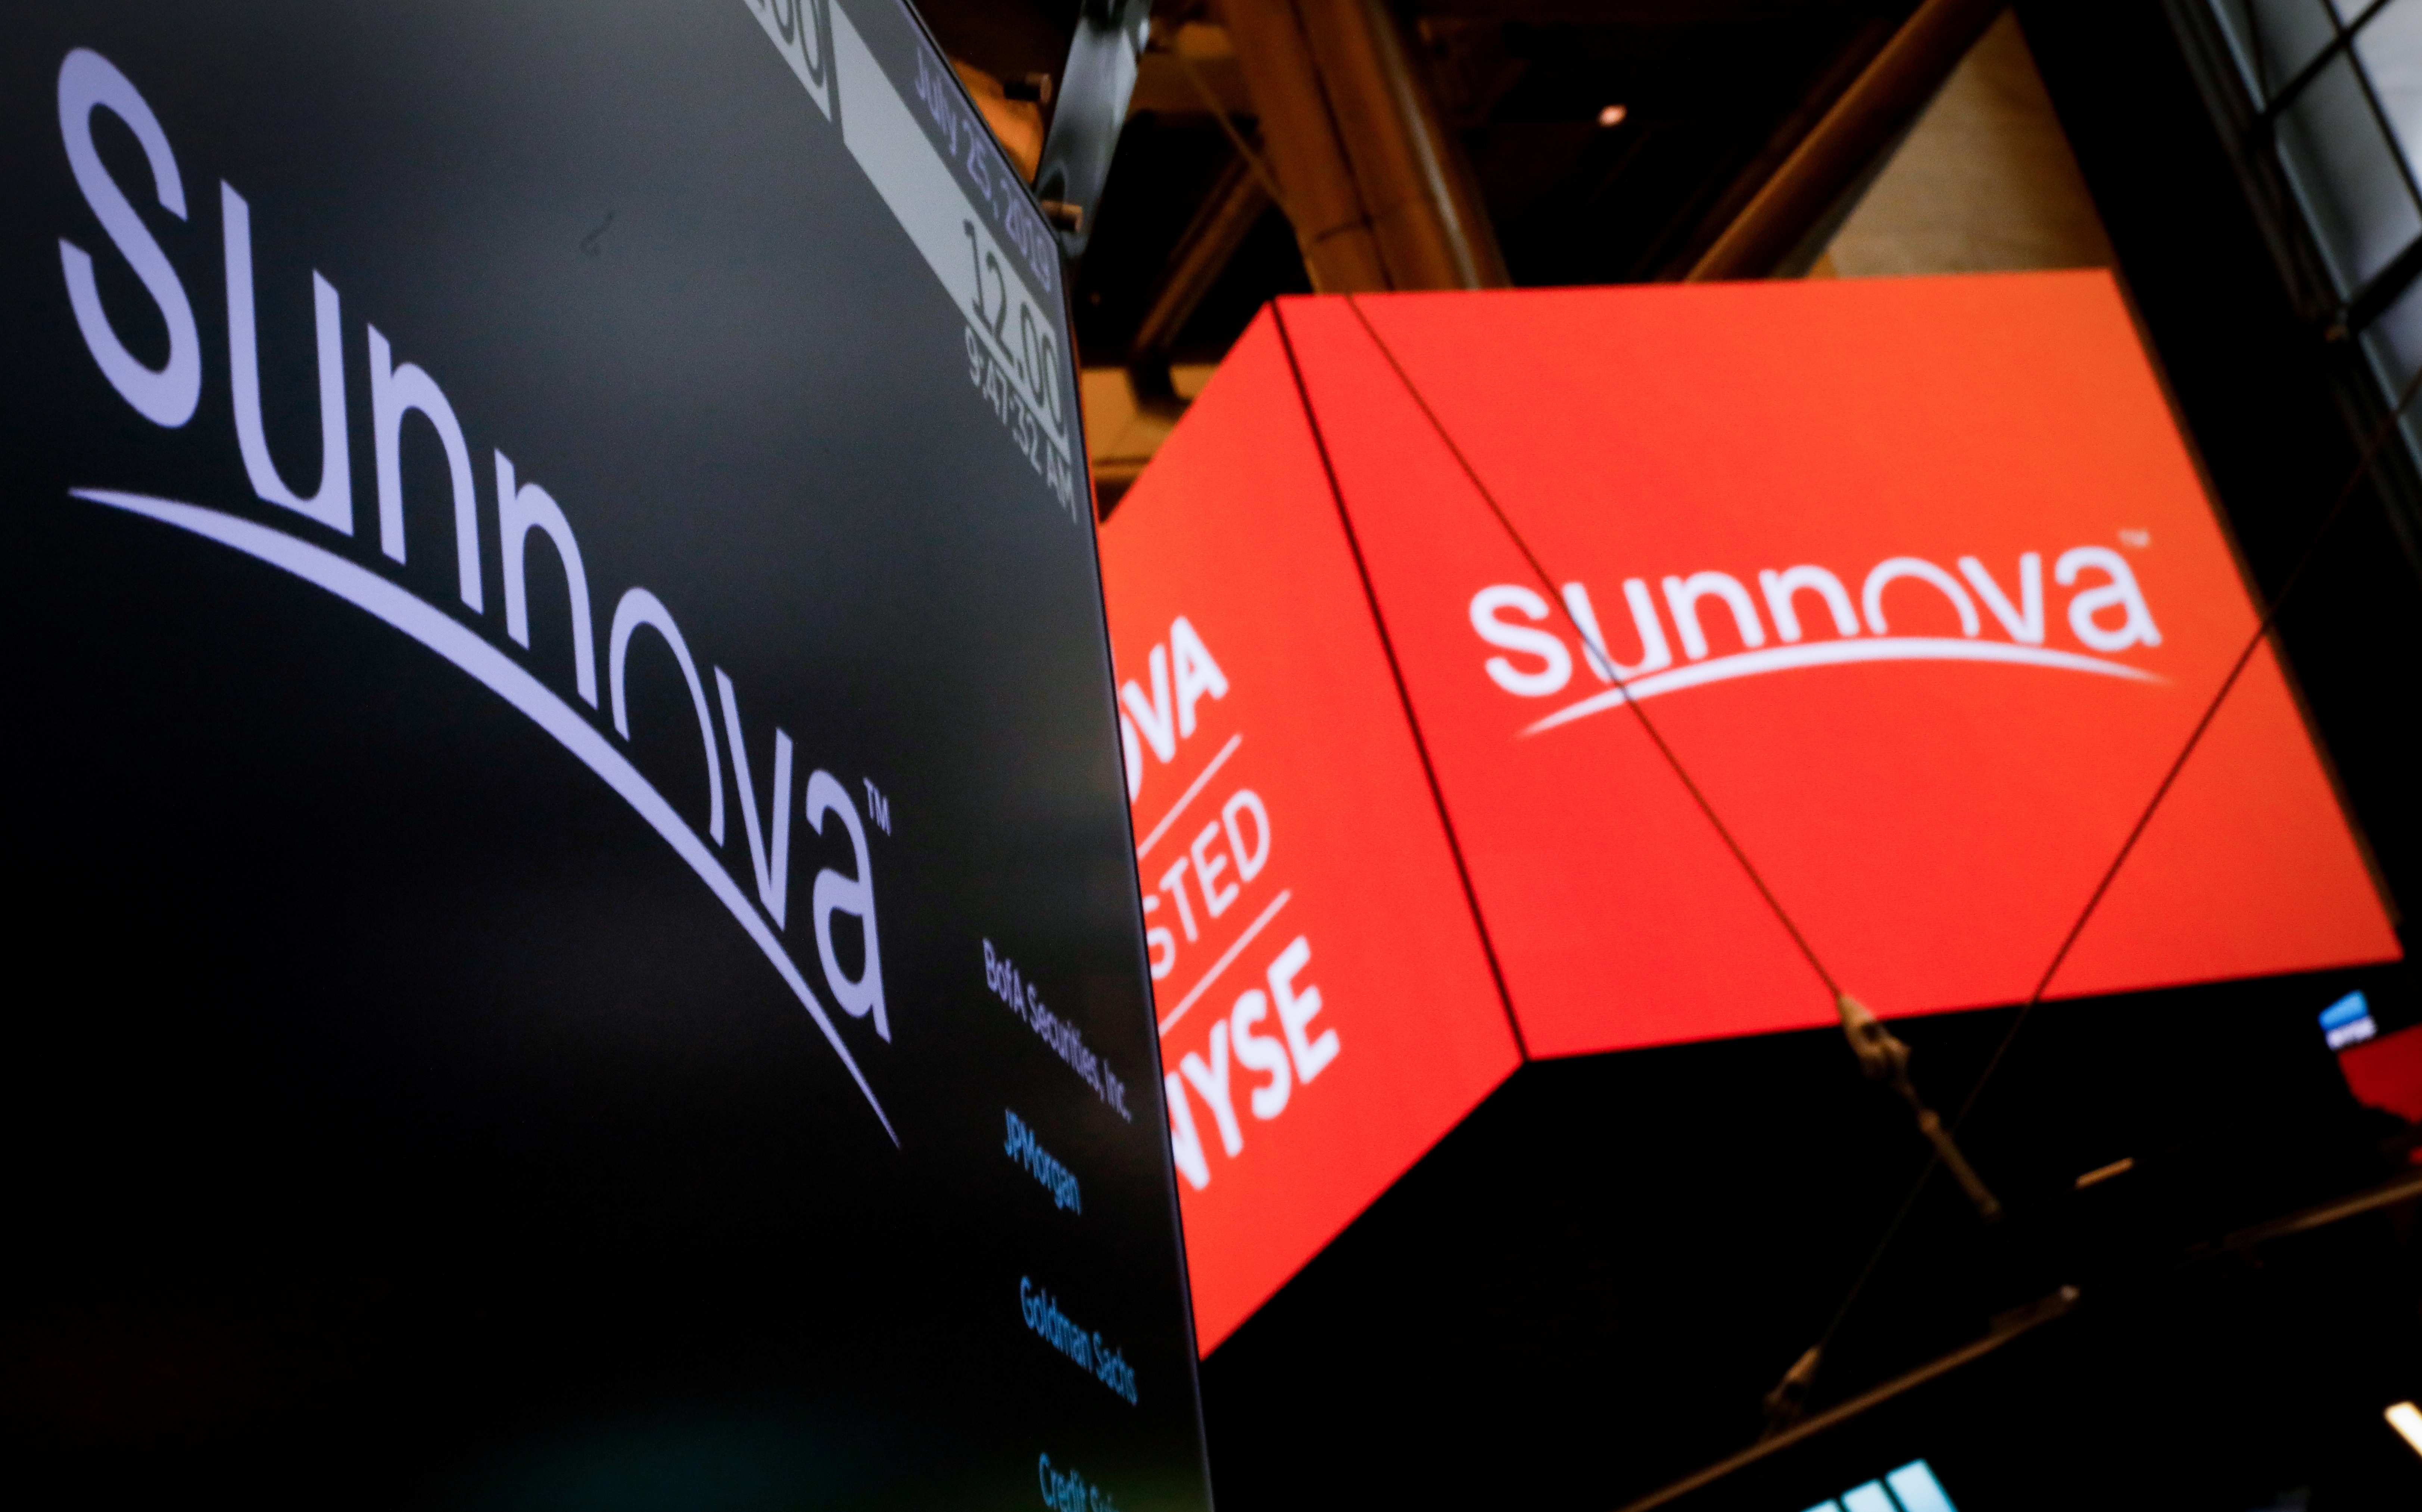 US commits to $3 billion loan guarantee for Sunnova to expand